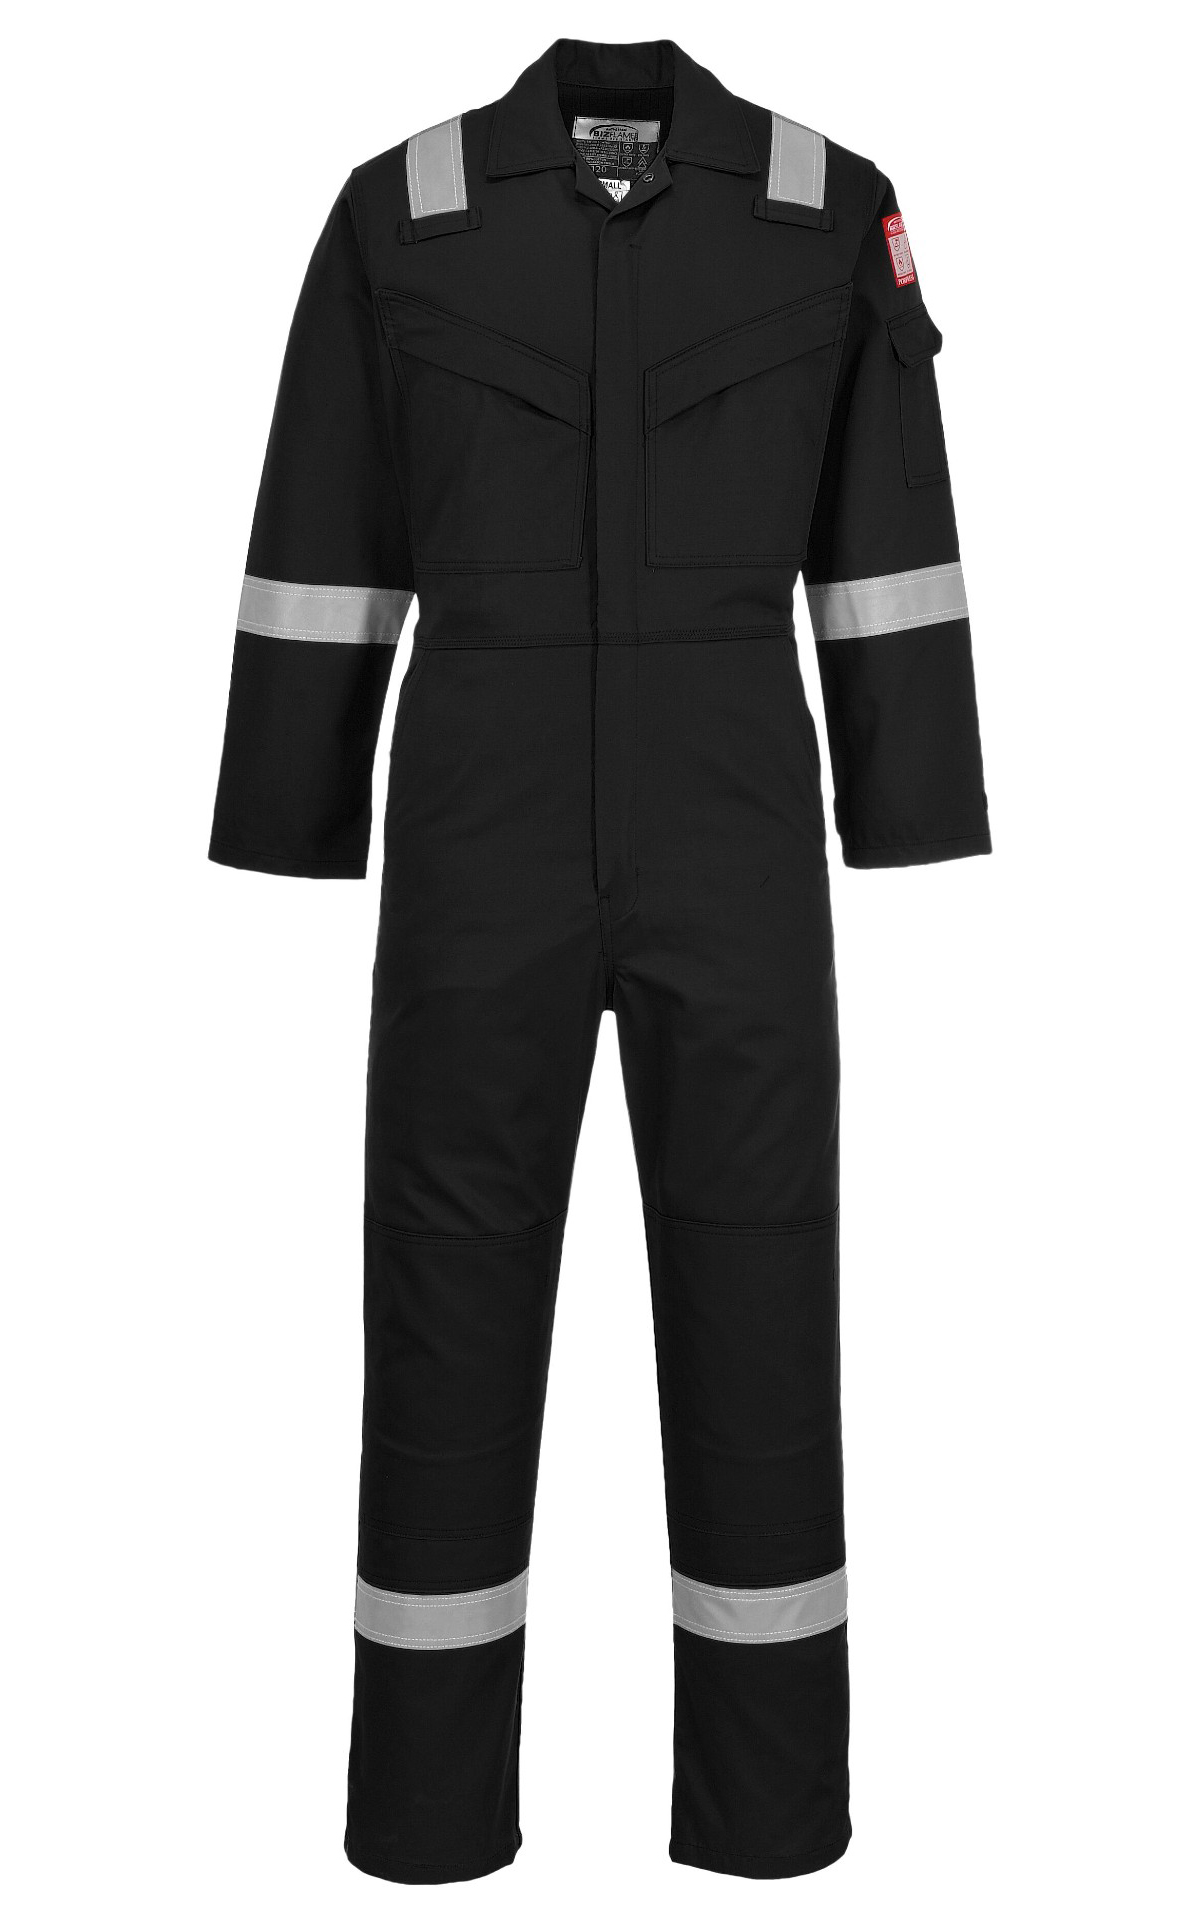 Brass: FR ARC Coverall with FR Reflective Bands